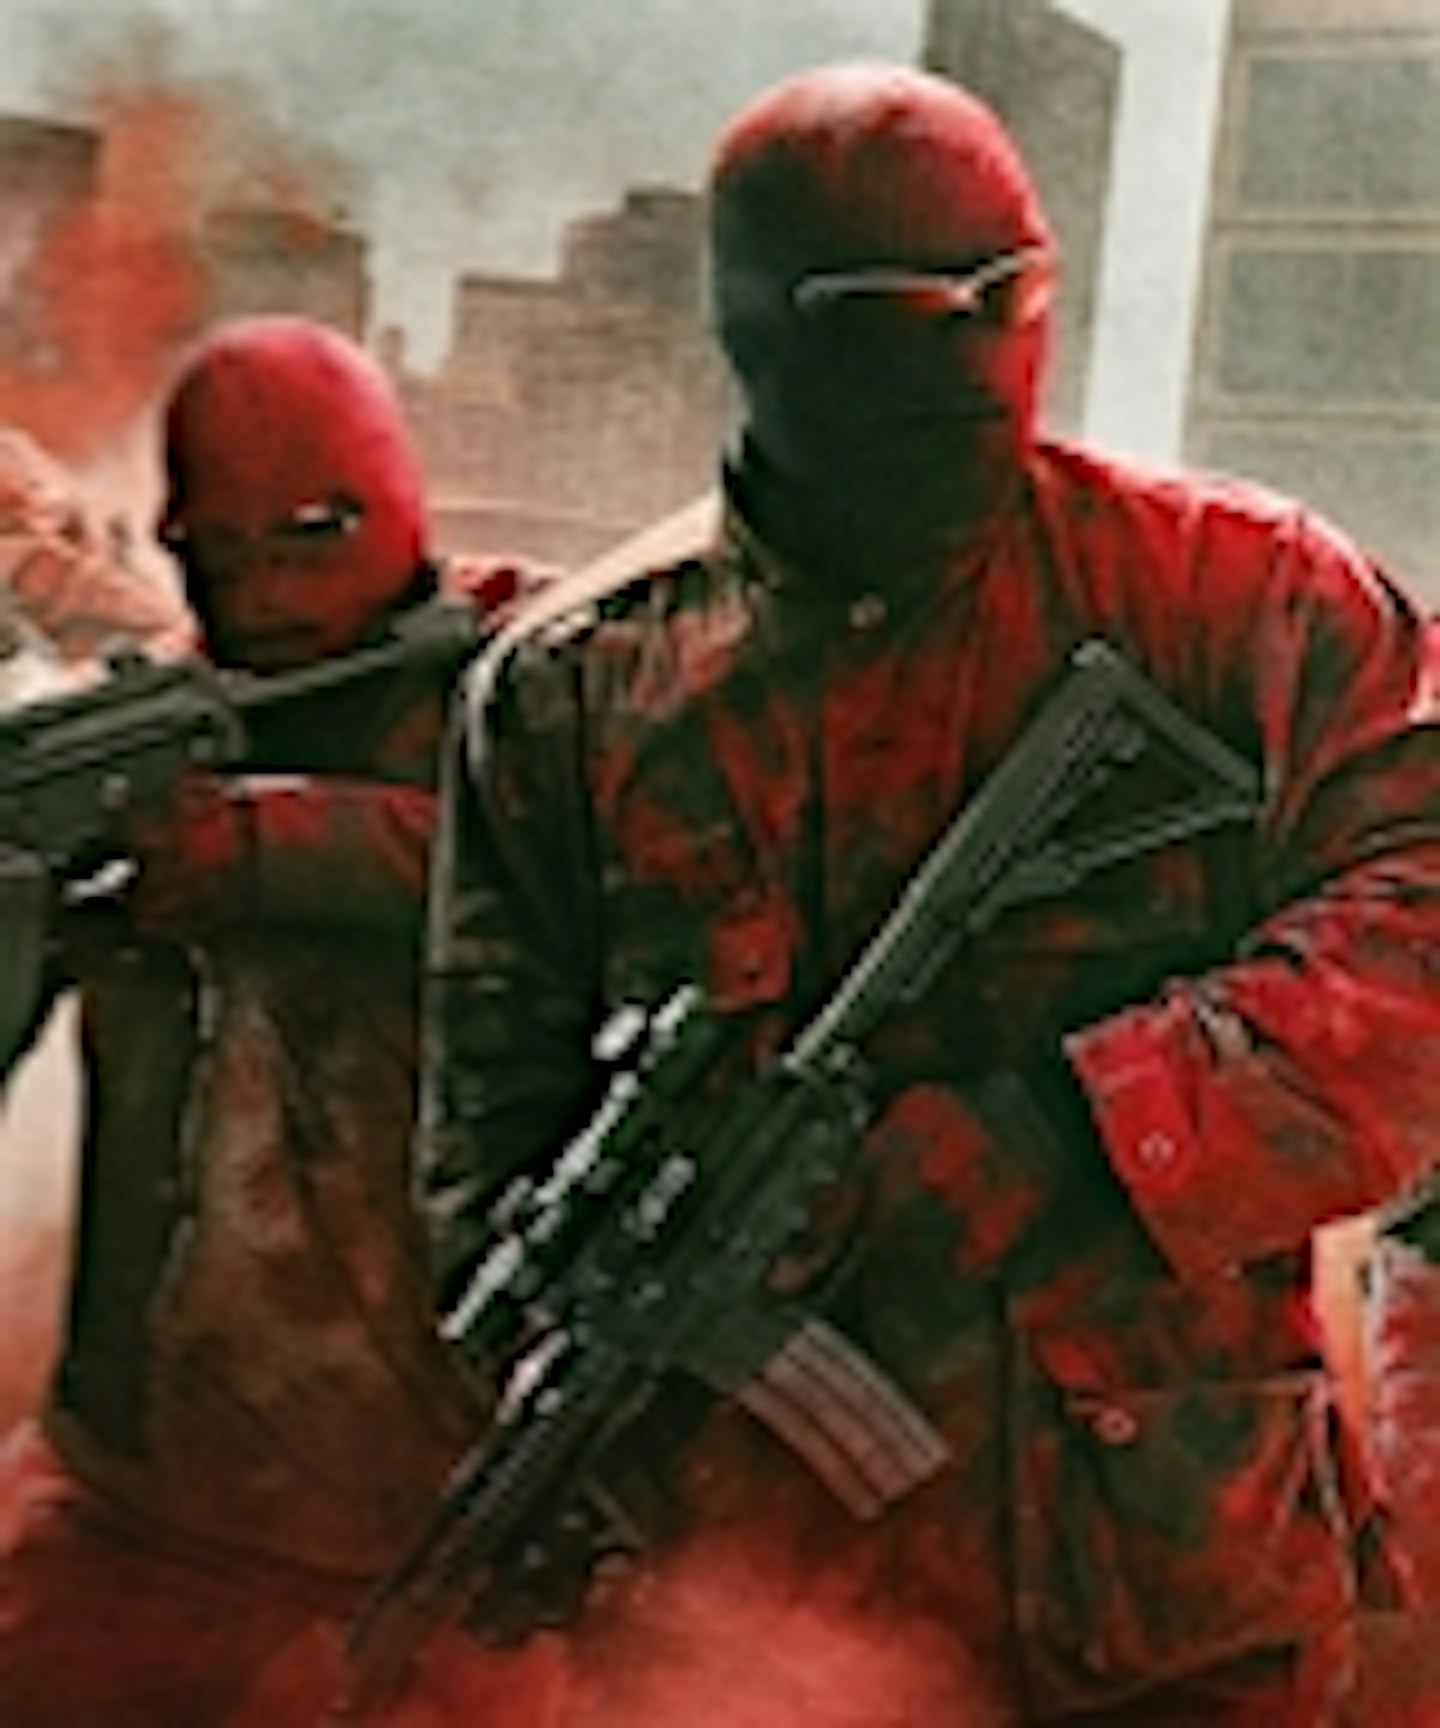 Red Band Triple 9 Trailer Hits The Streets